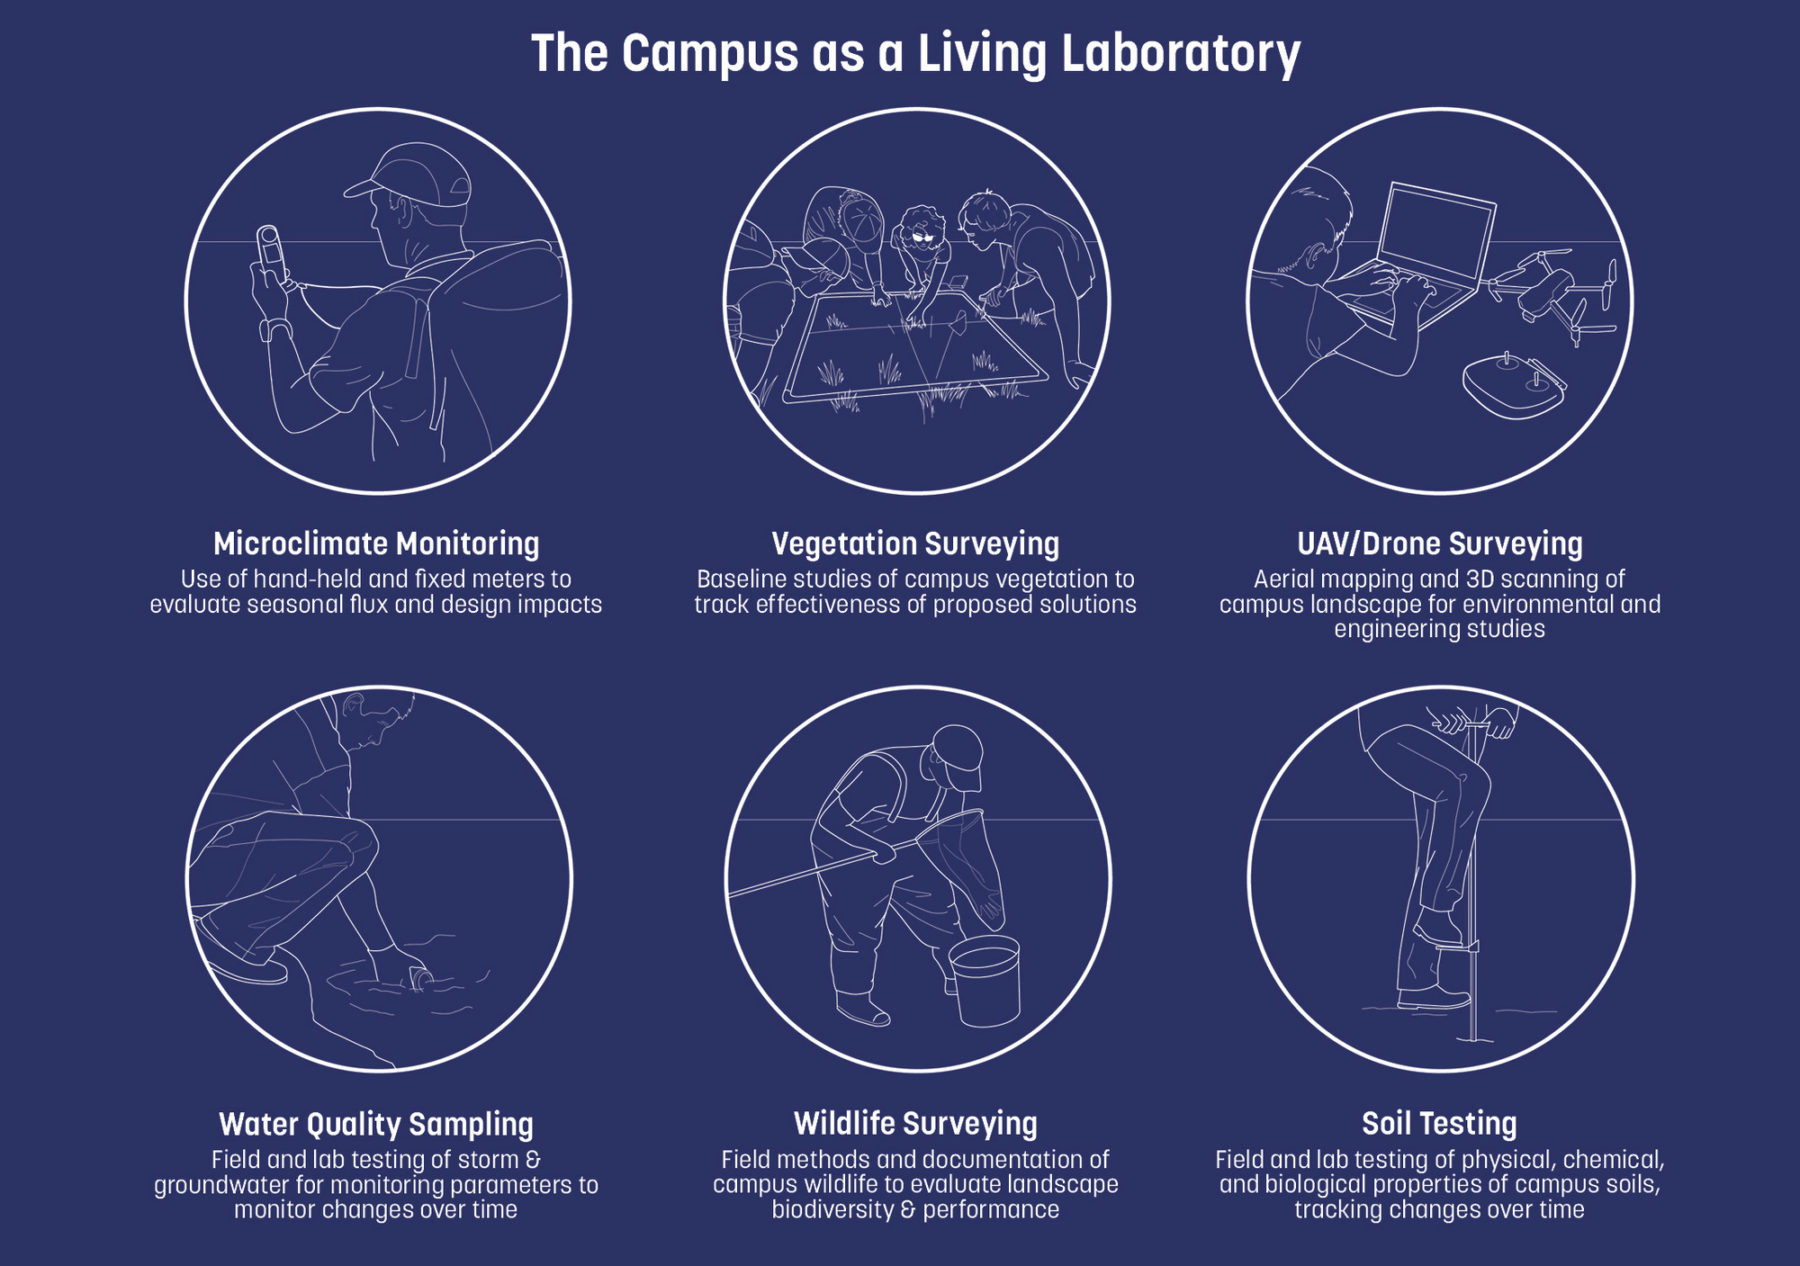 diagram of different campus conditions. The image title reads 